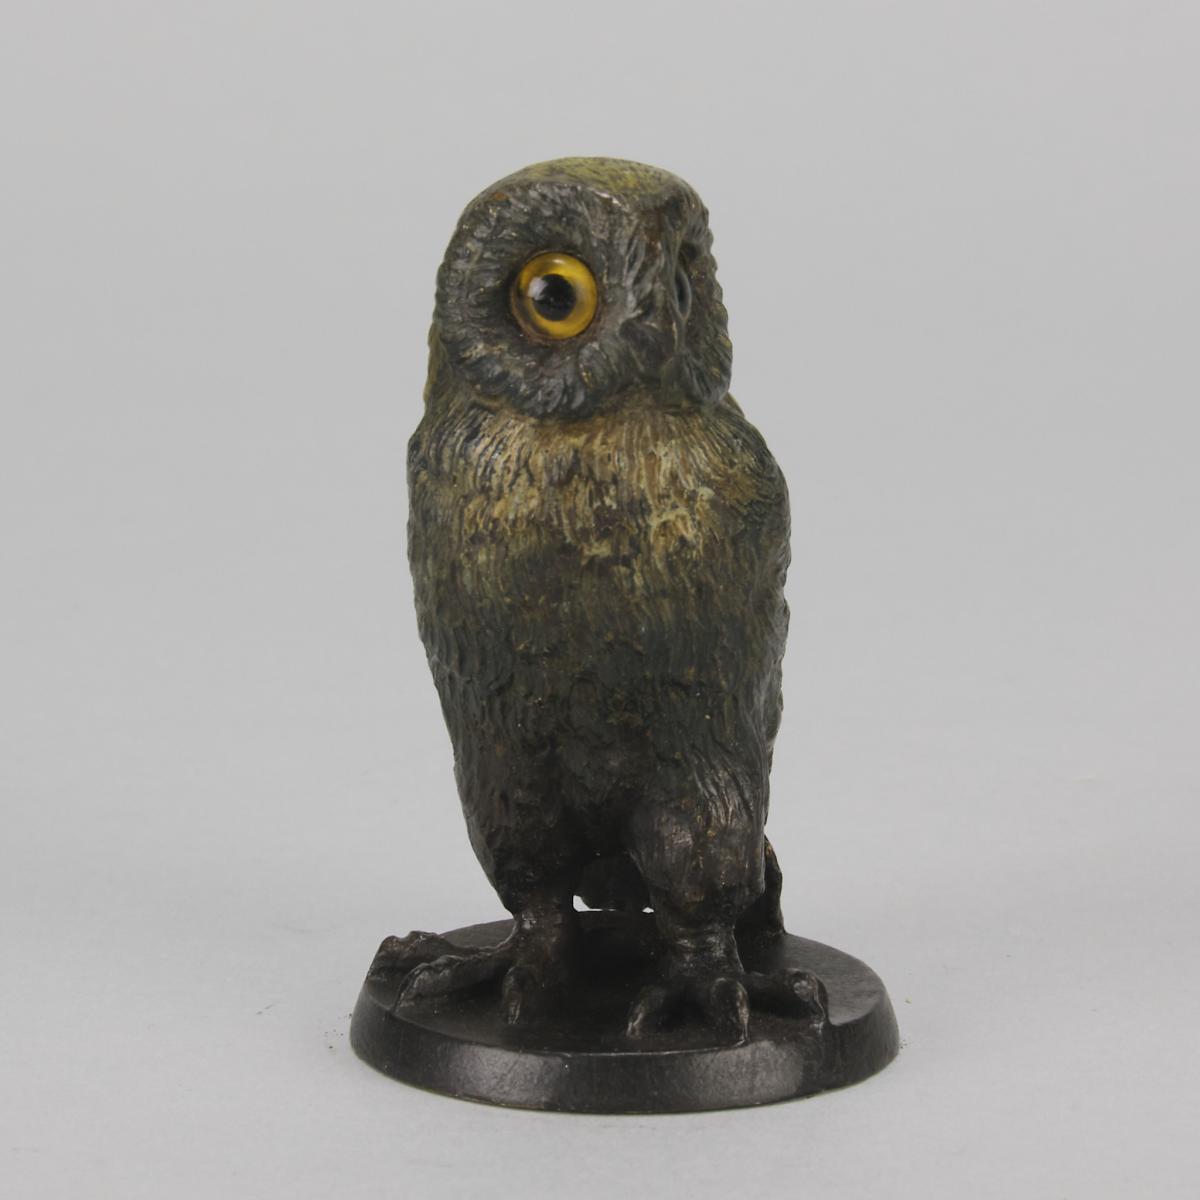  Early 20th Century Austrian Cold-Painted Bronze "Owl" Circa 1900